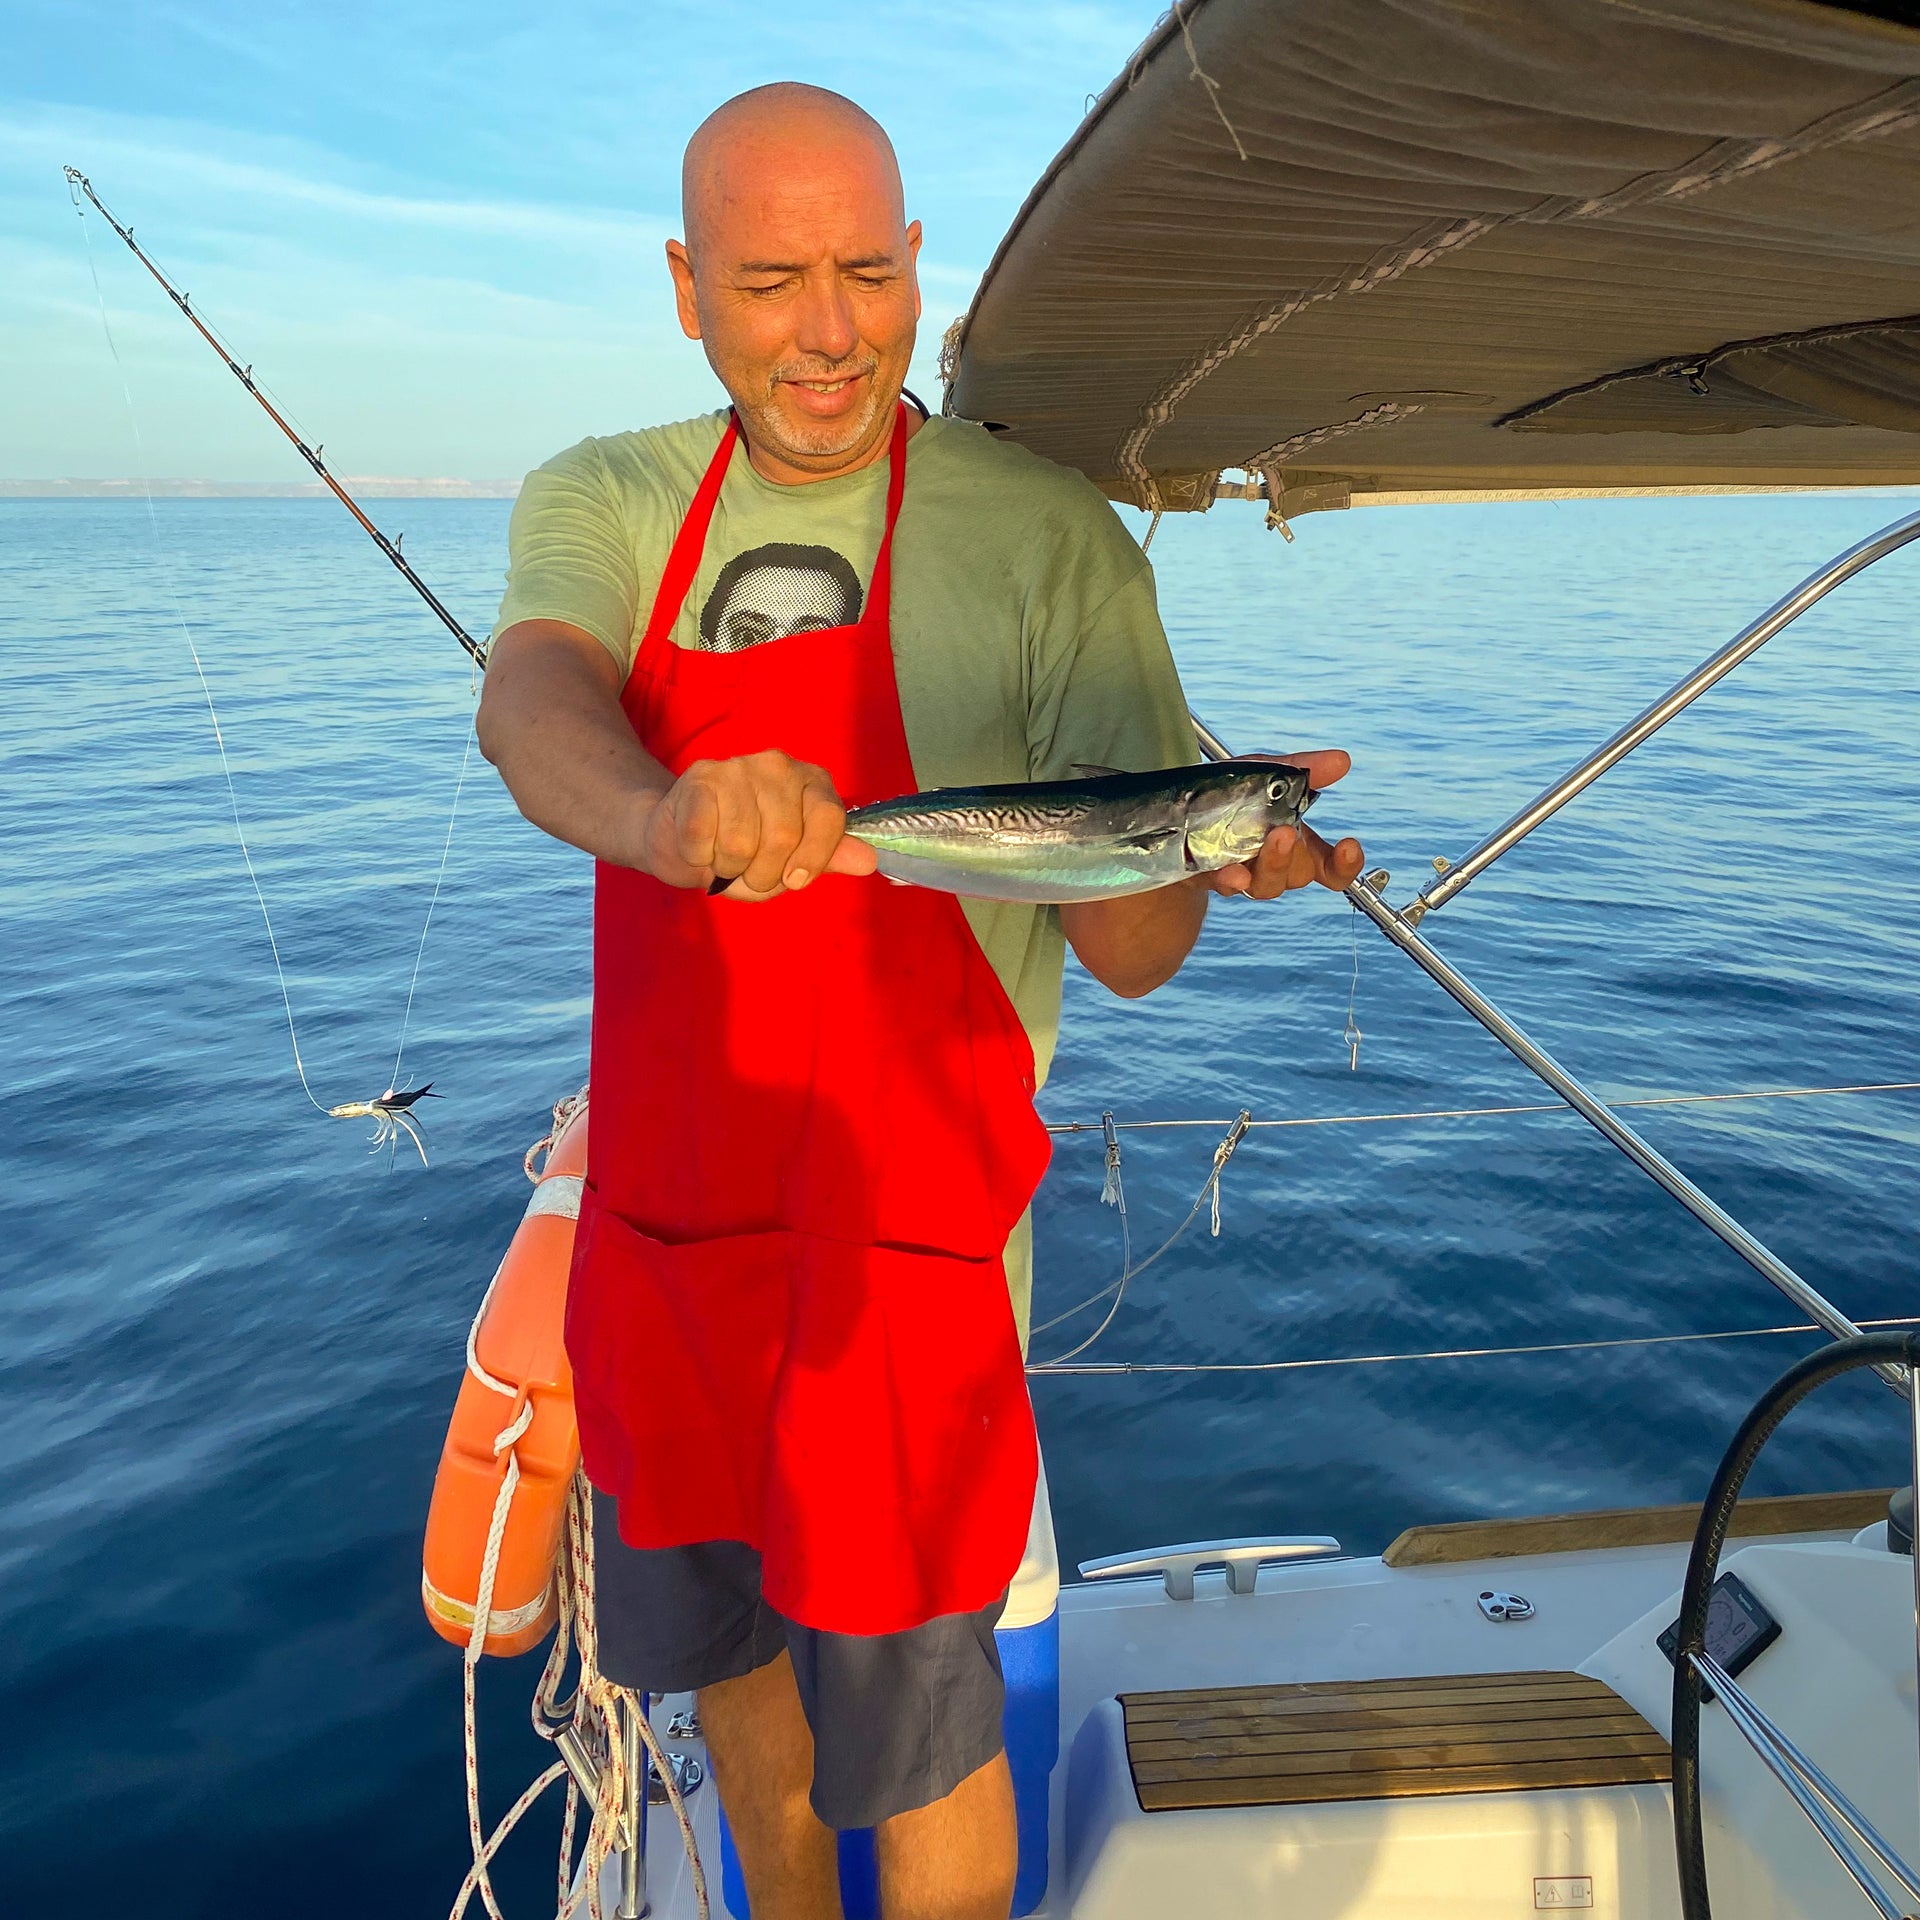 Fish ready to eat at Sea of Cortez